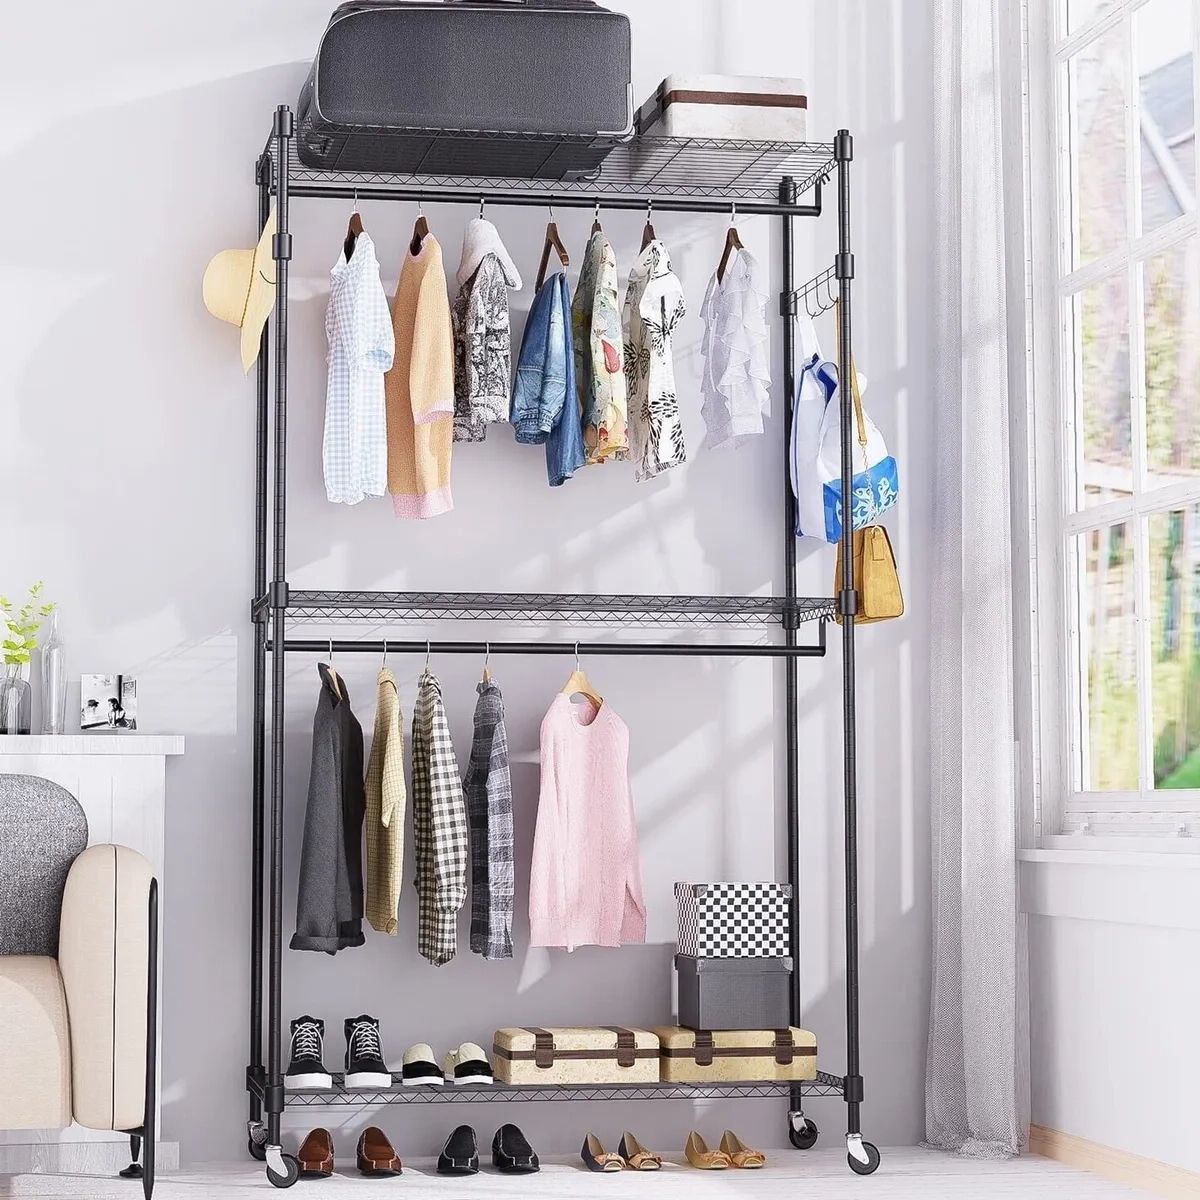 Wire Shelving Clothes Closet Organizer Garment Rack Rolling Shelf With B  125 | Ebay Pertaining To Wire Garment Rack Wardrobes (View 11 of 20)